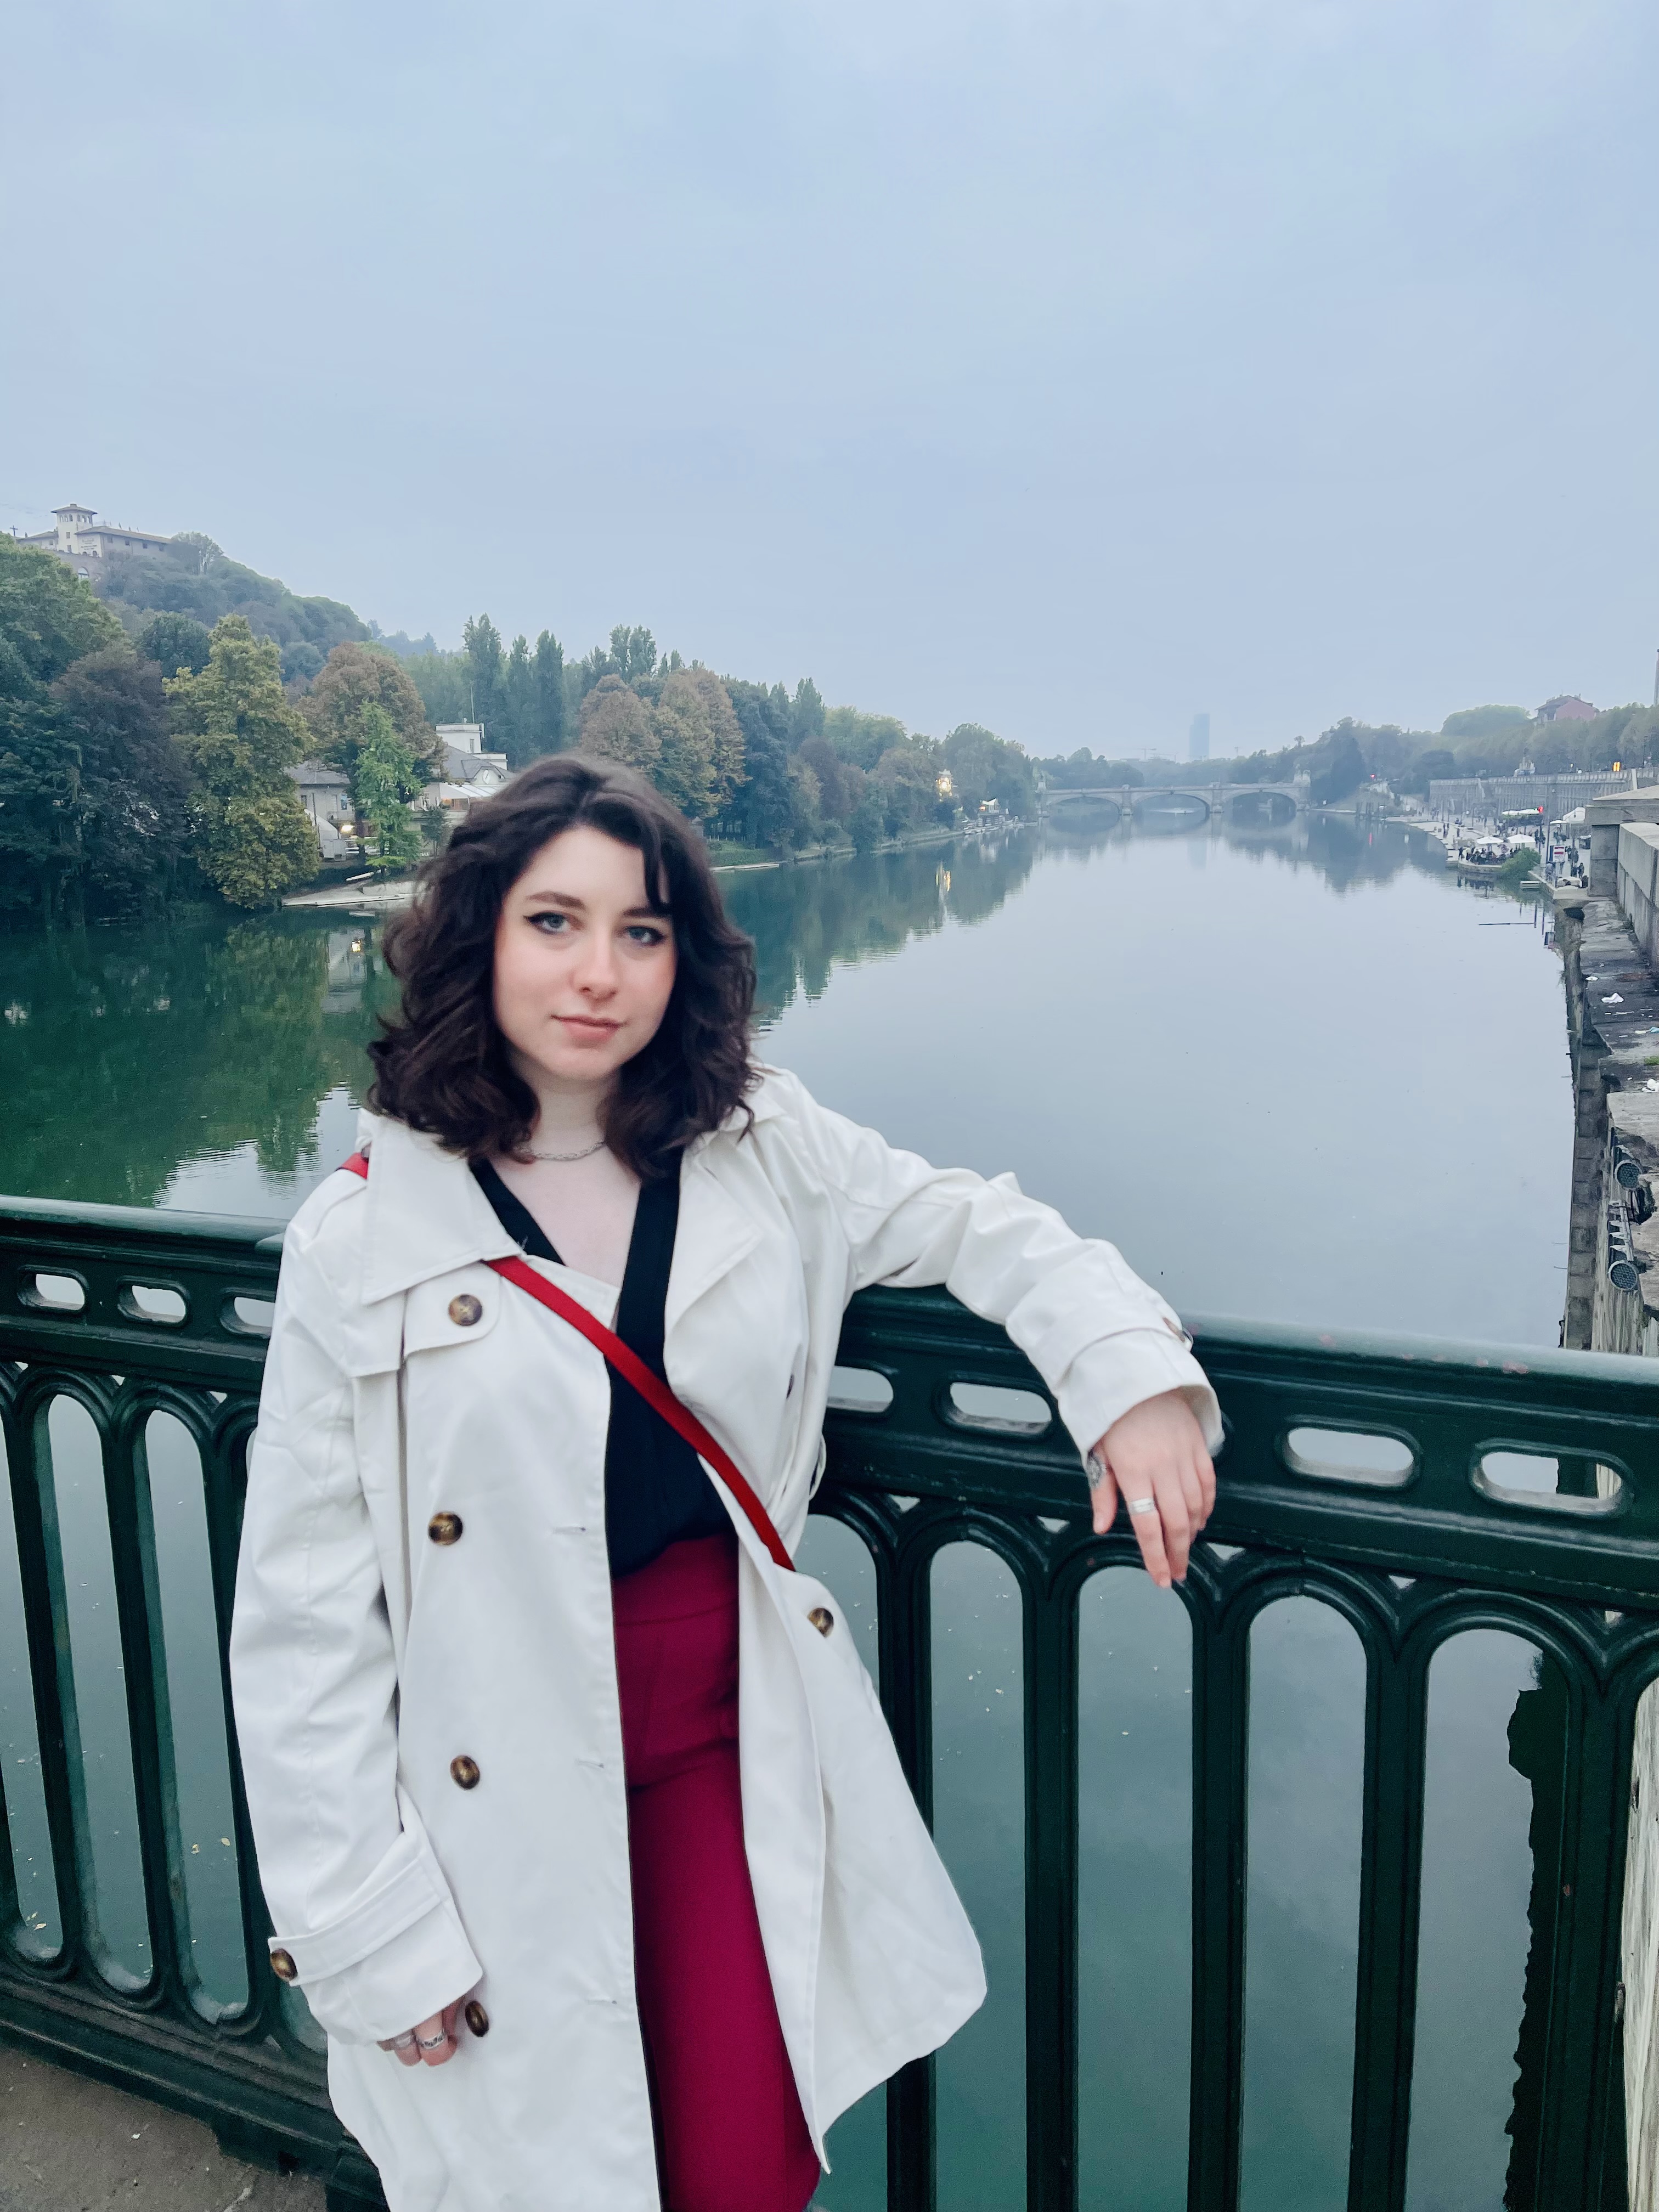 Tatiana in a white overcoat leans casually against a metal fence on a bridge overlooking a picturesque canal